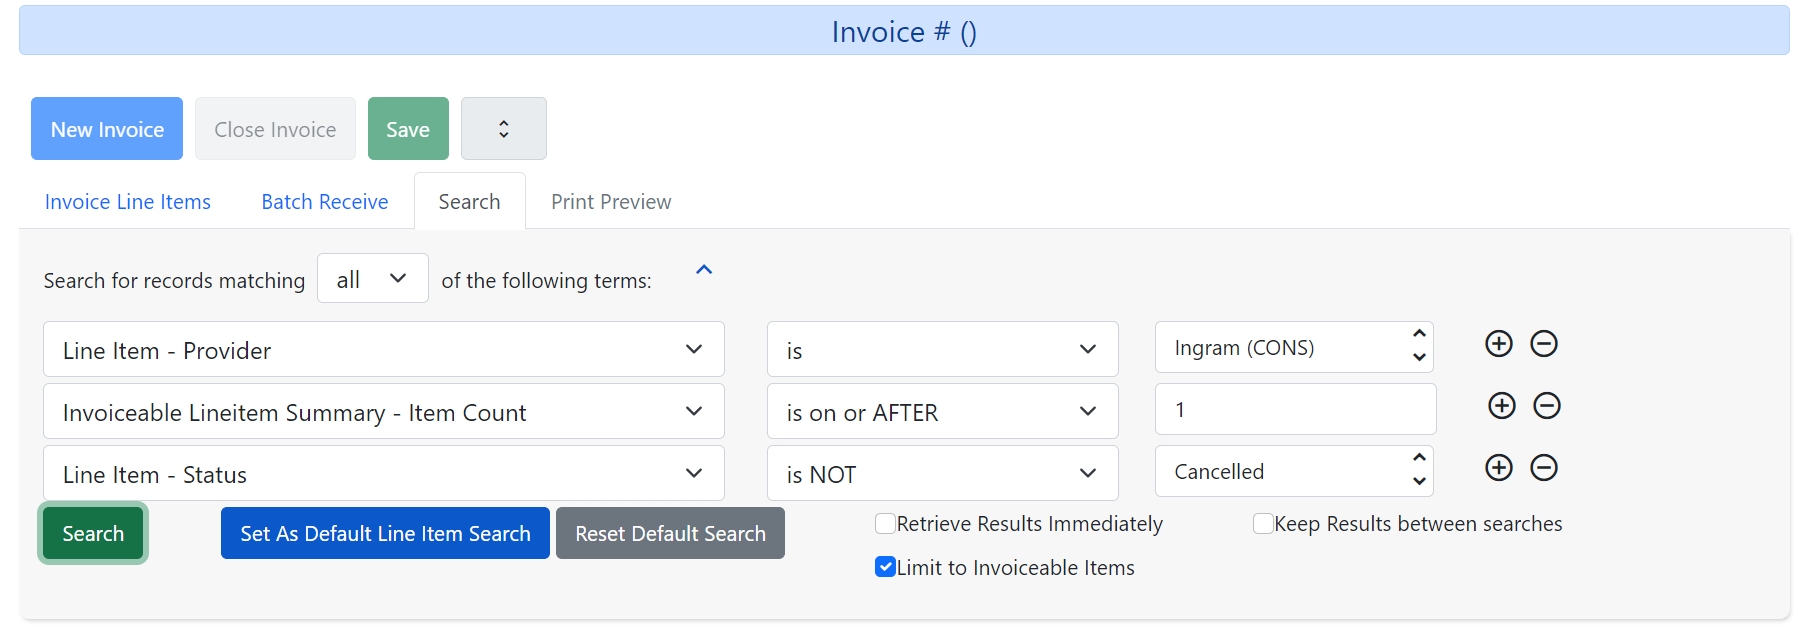 Search for lineitems from an invoice